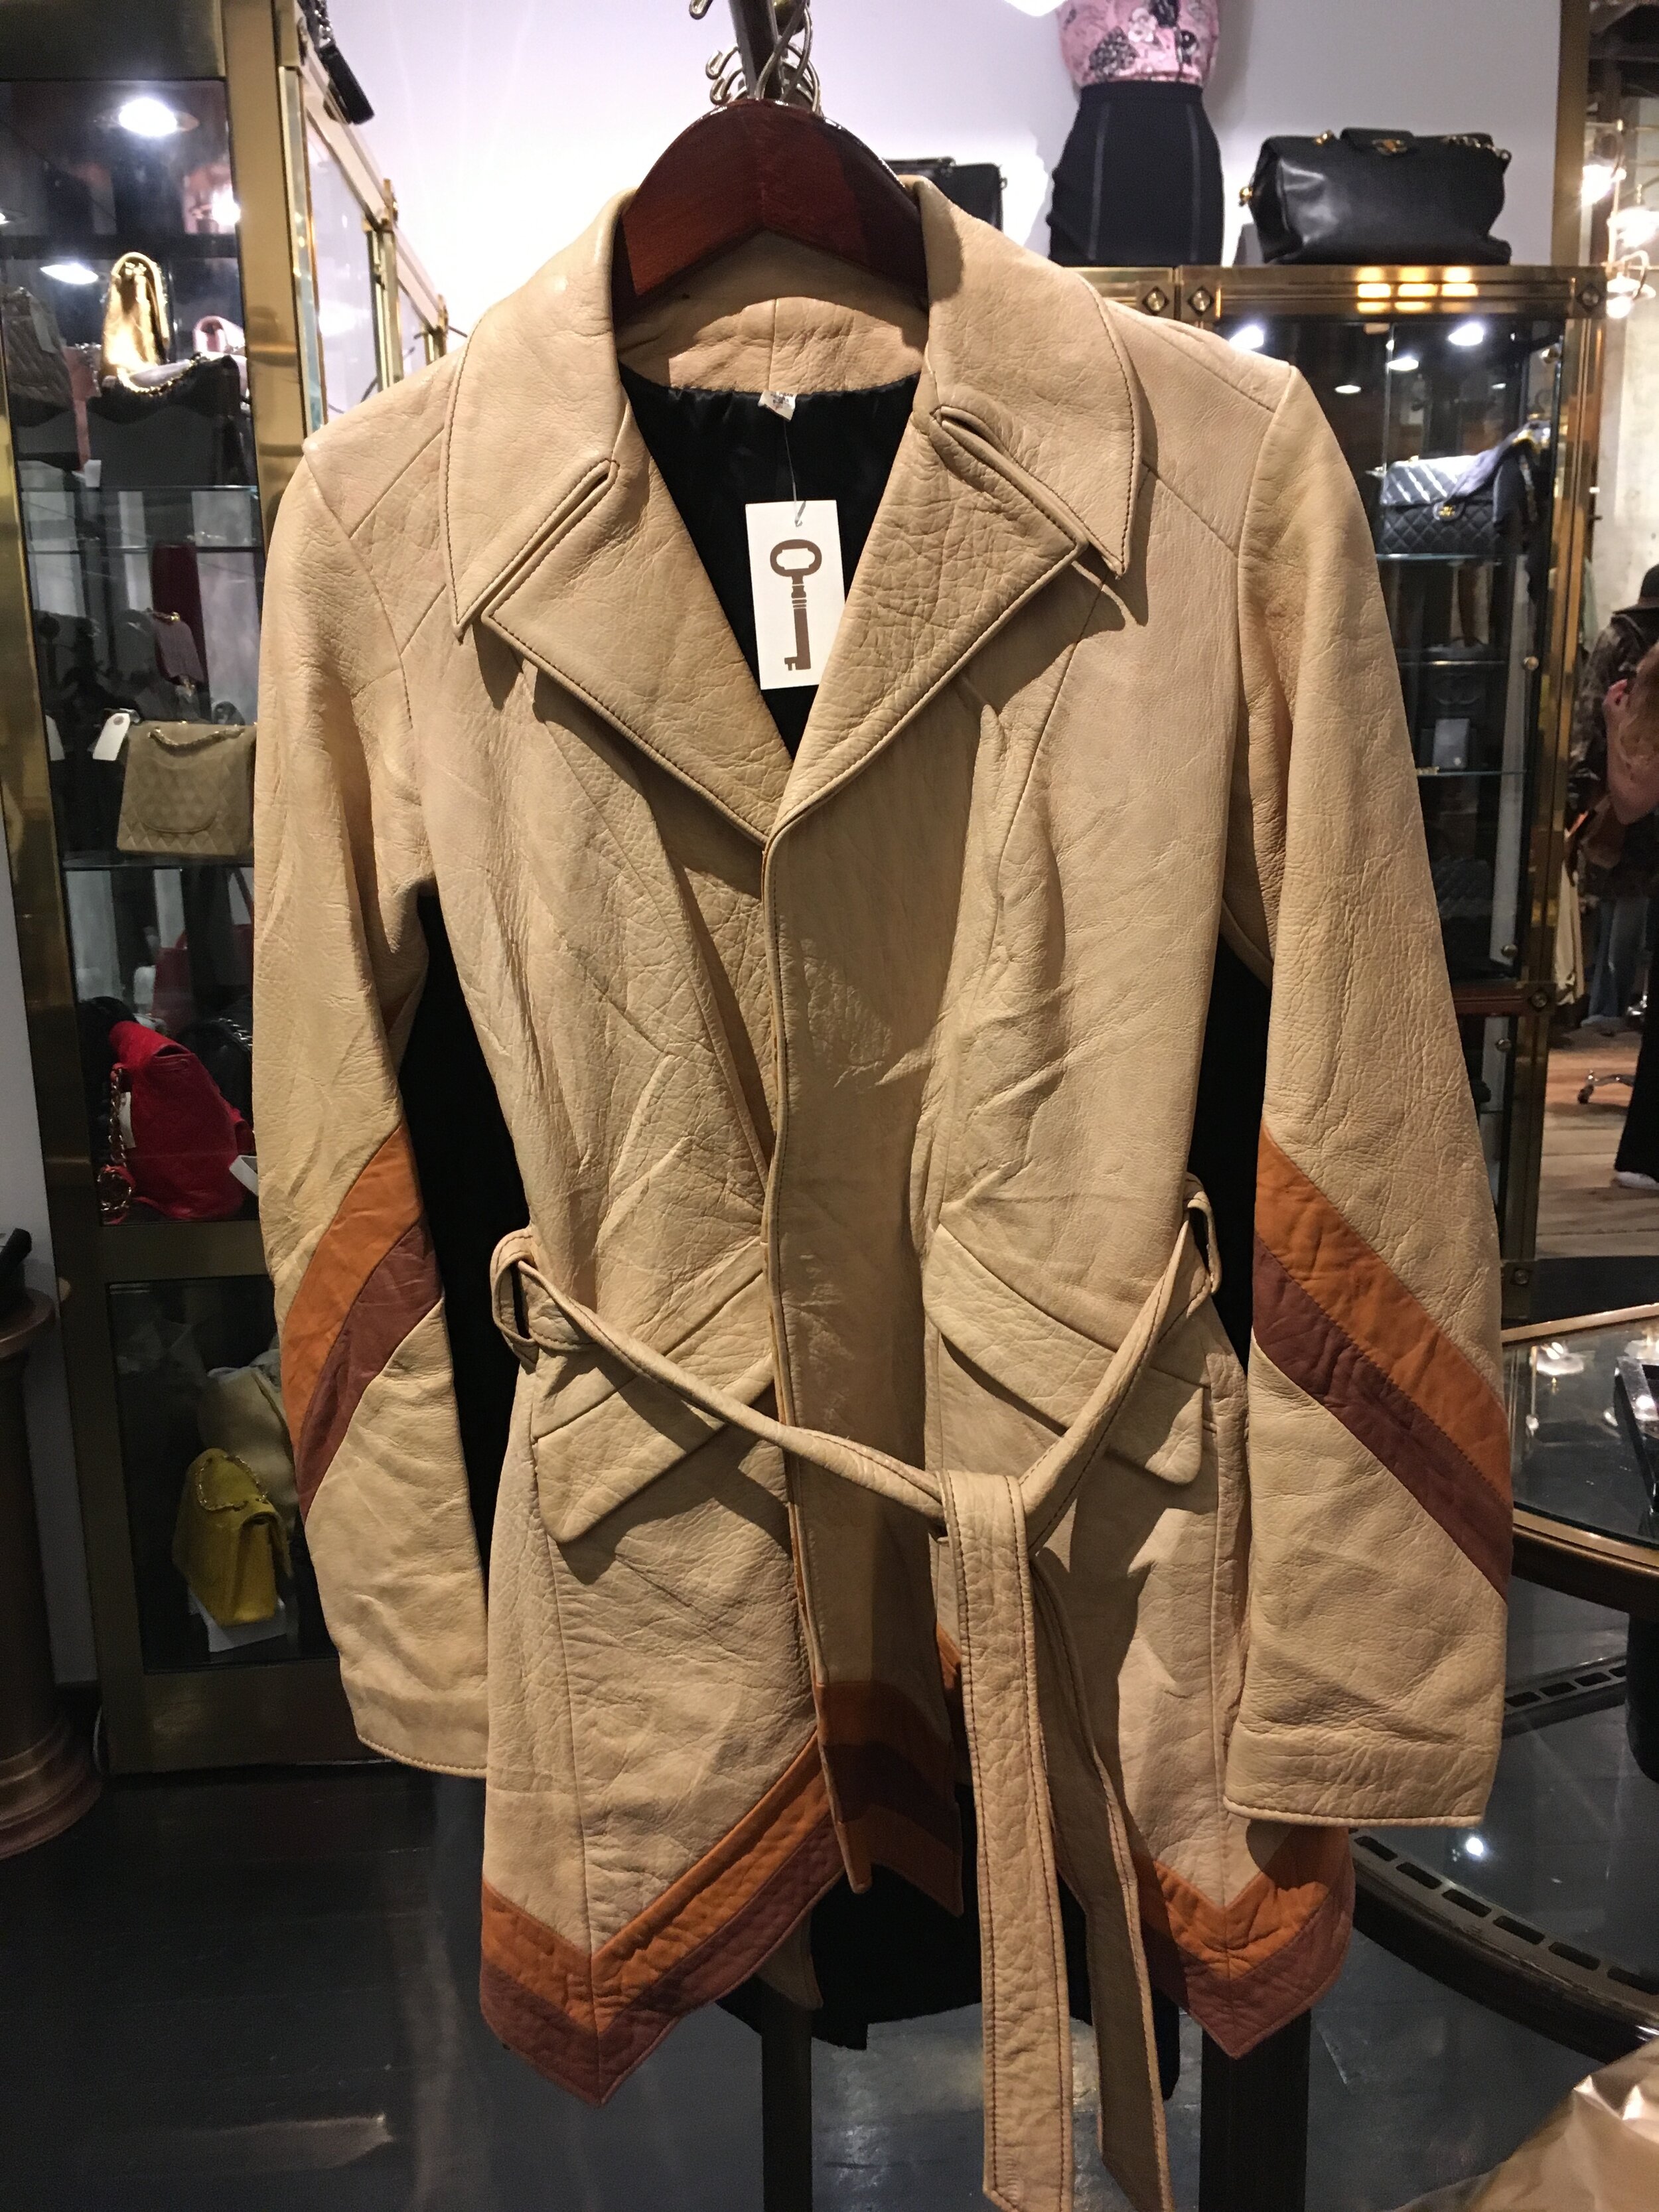 Jacket I sourced for "Abby," S1